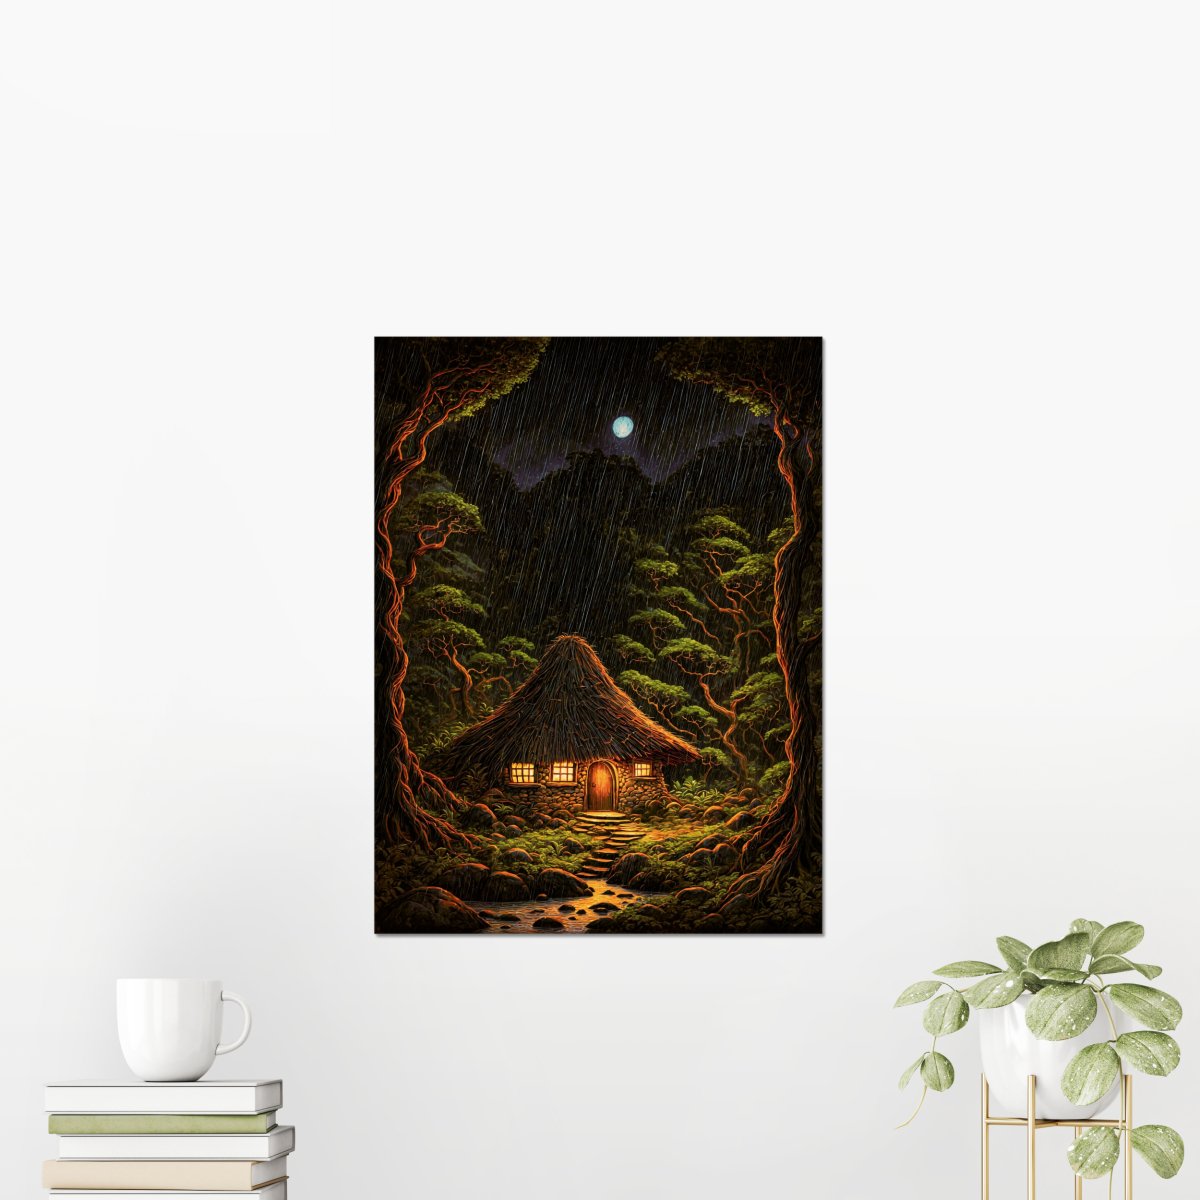 Dark roots isle - Art print - Poster - Ever colorful